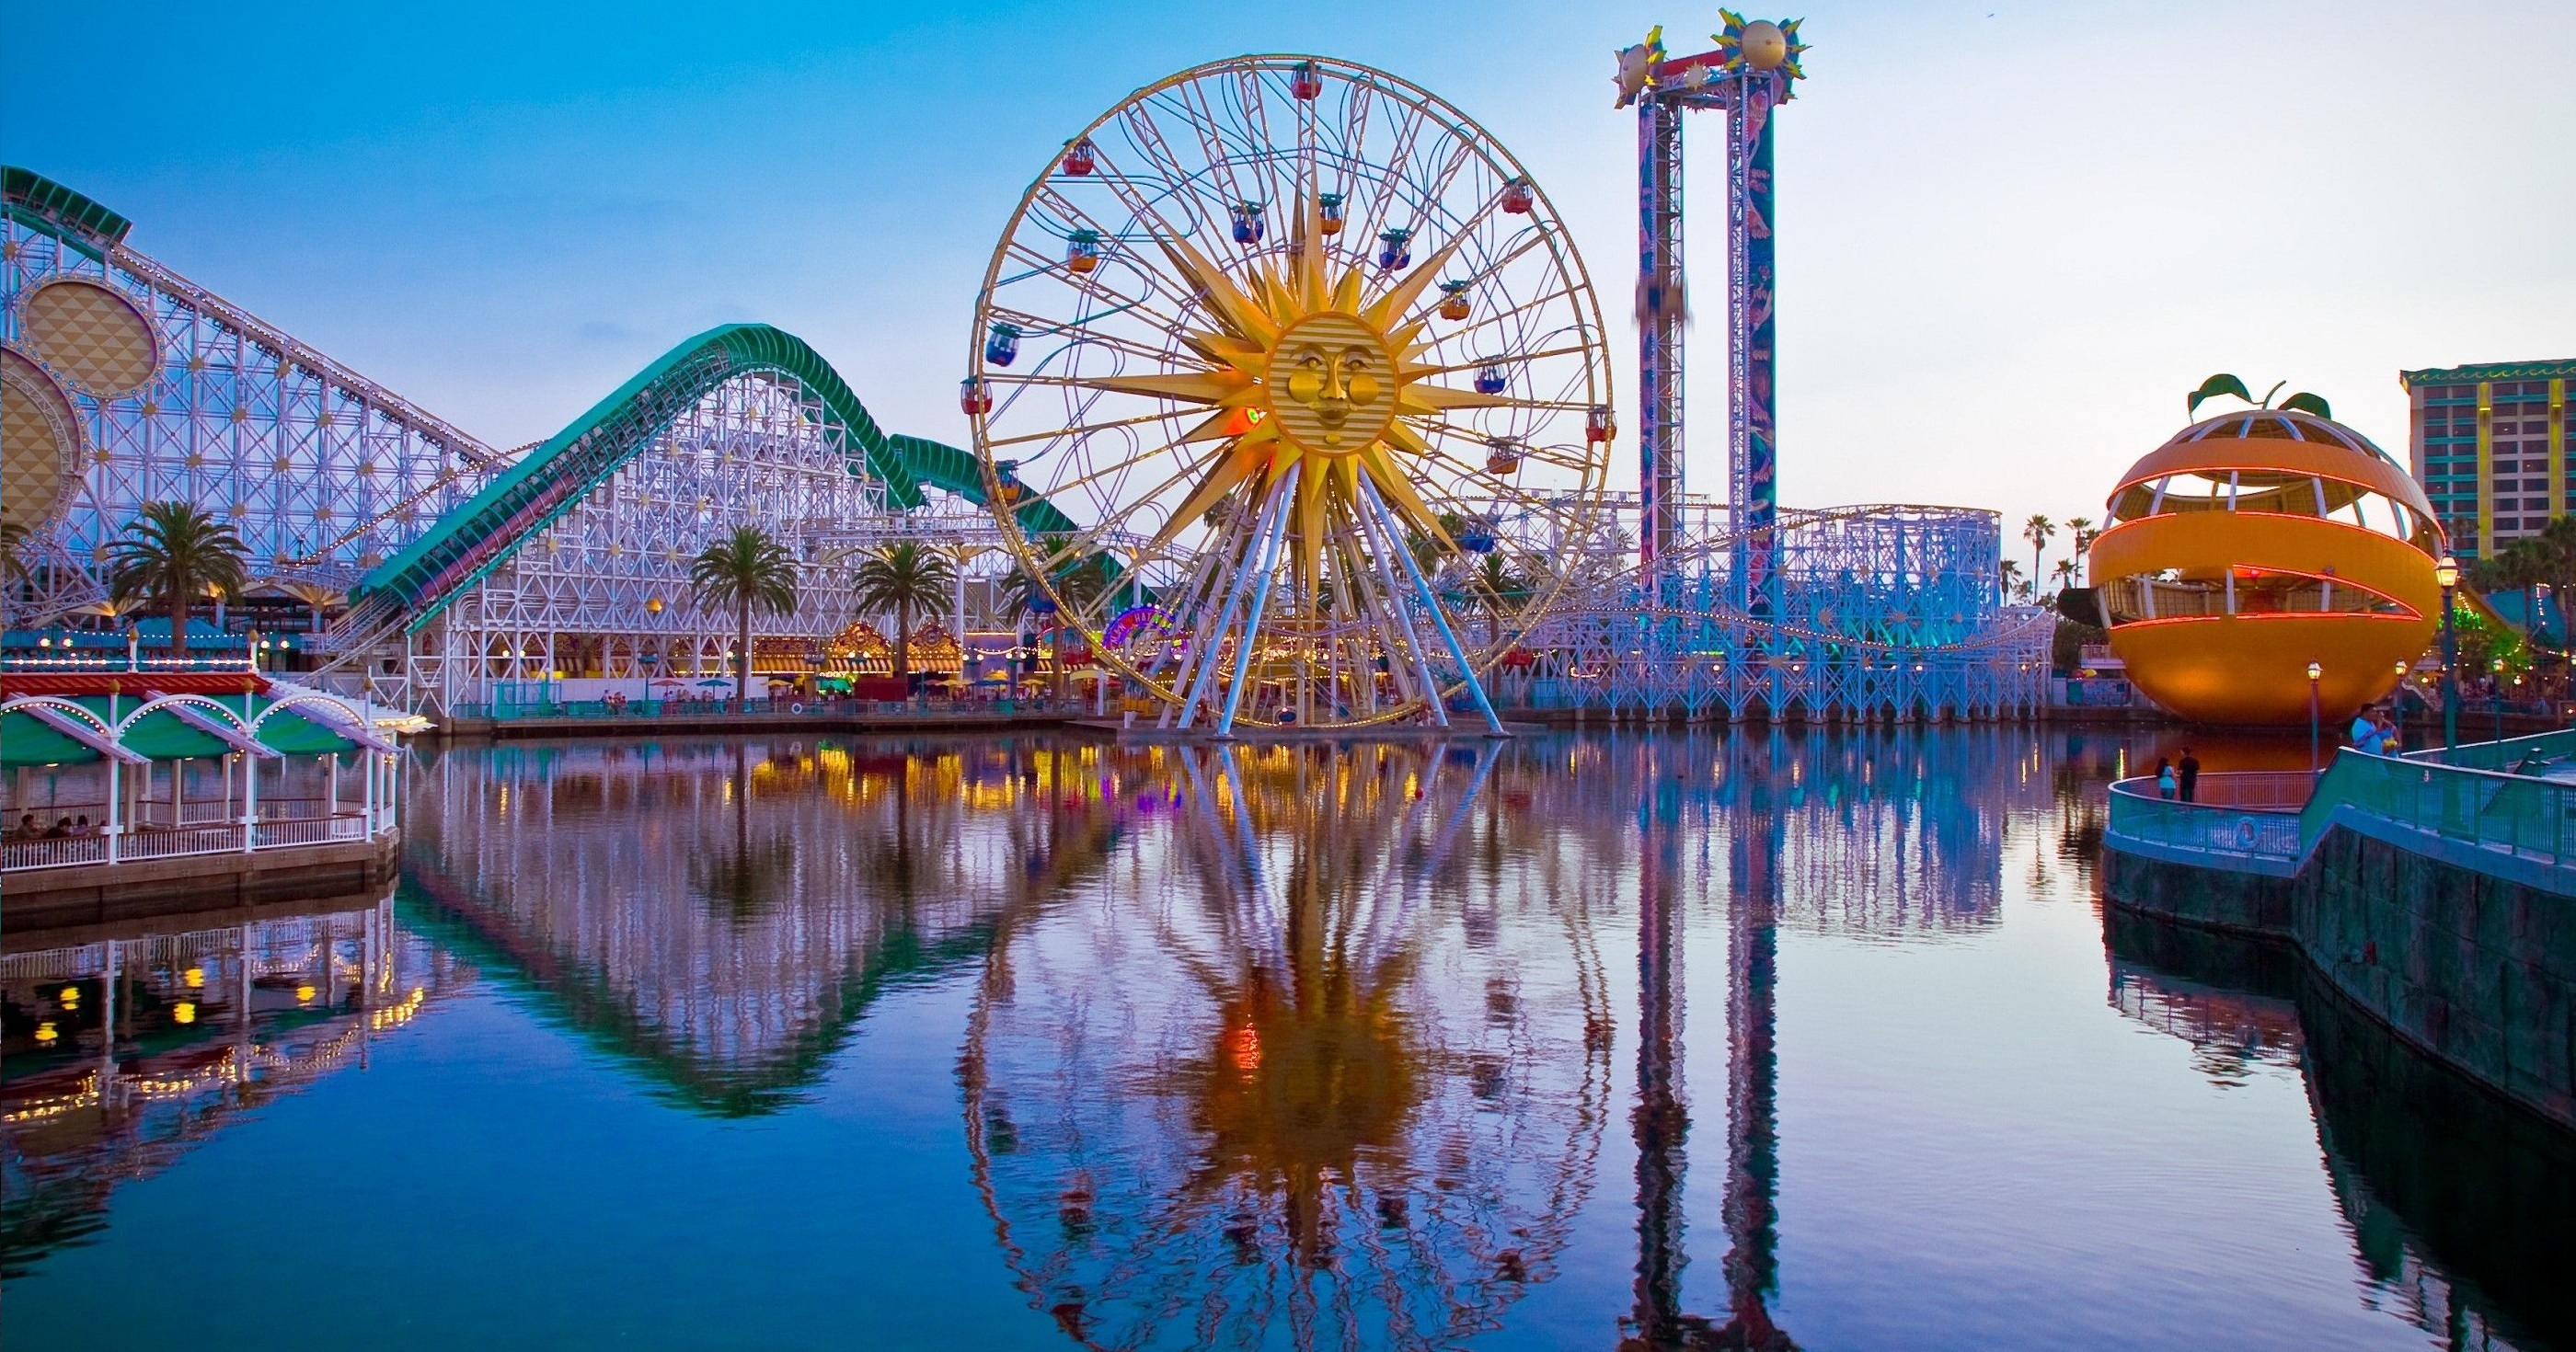 Top 10 Theme Parks In The World That You Must Visit Before You Die